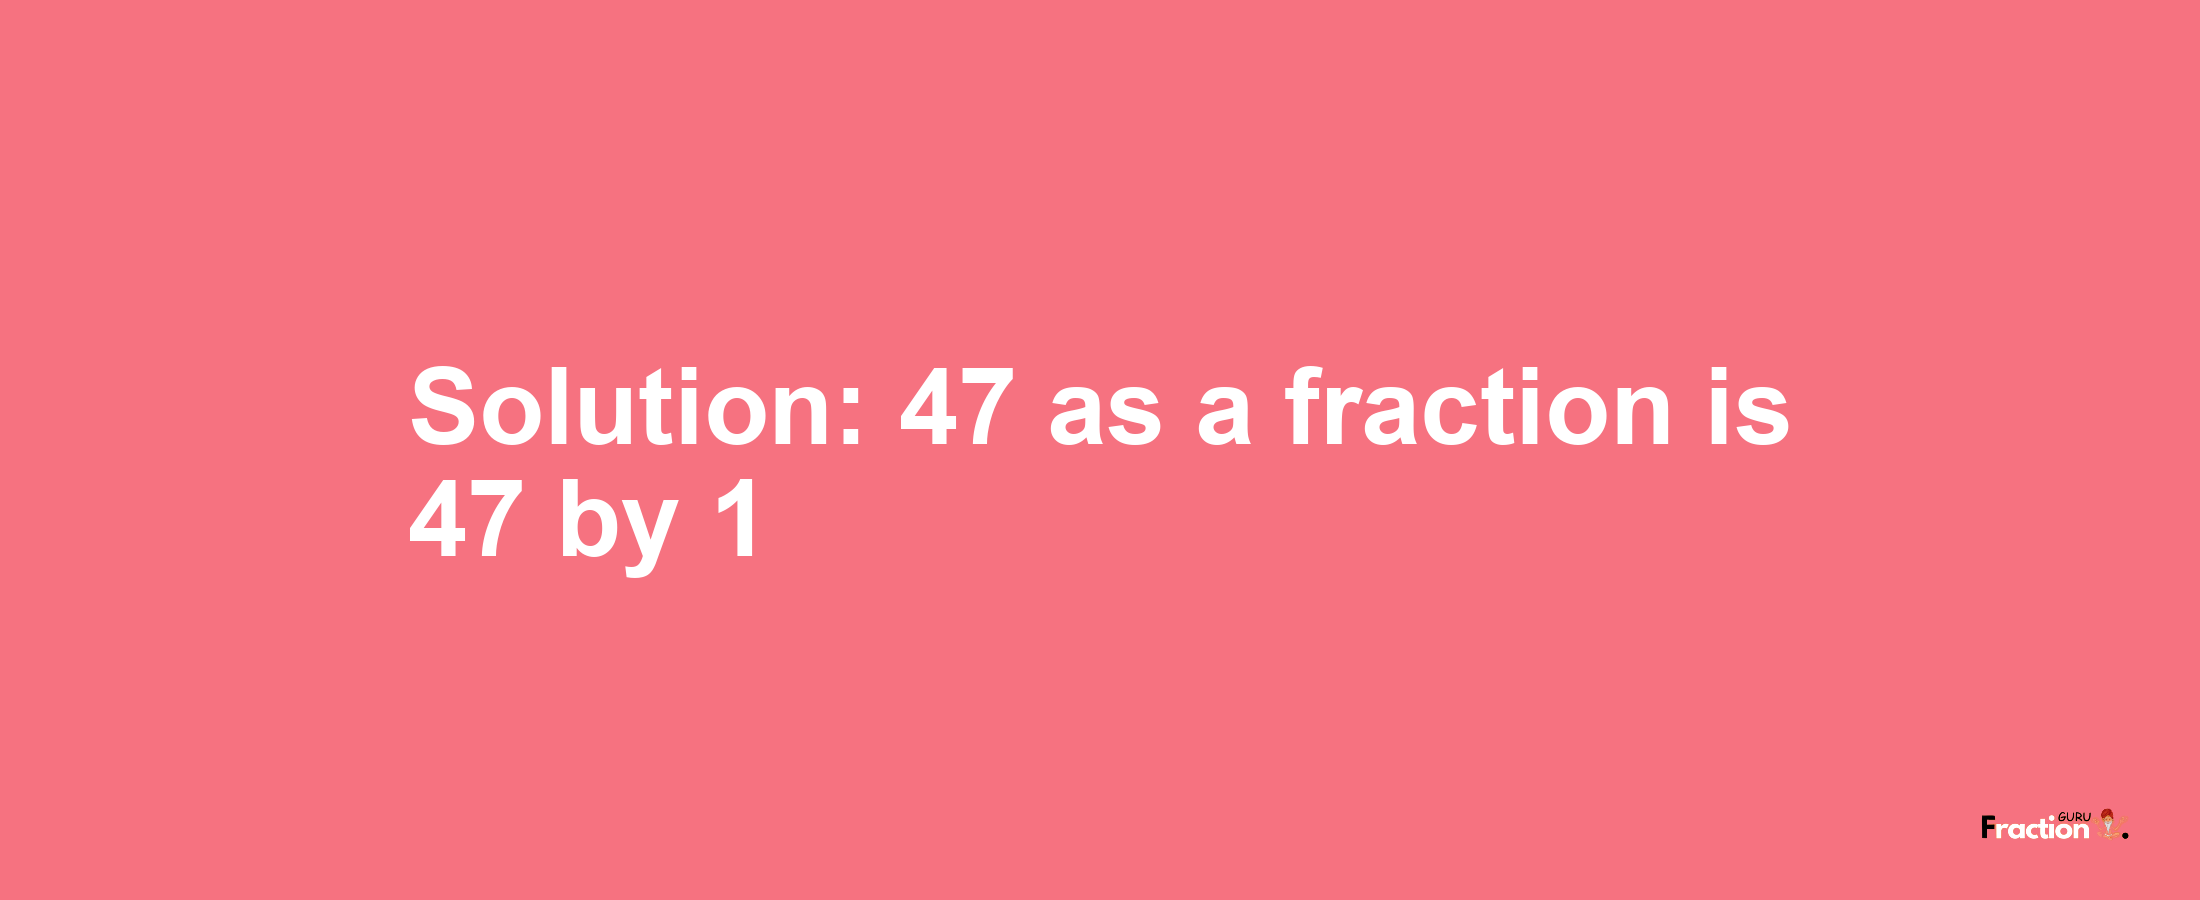 Solution:47 as a fraction is 47/1